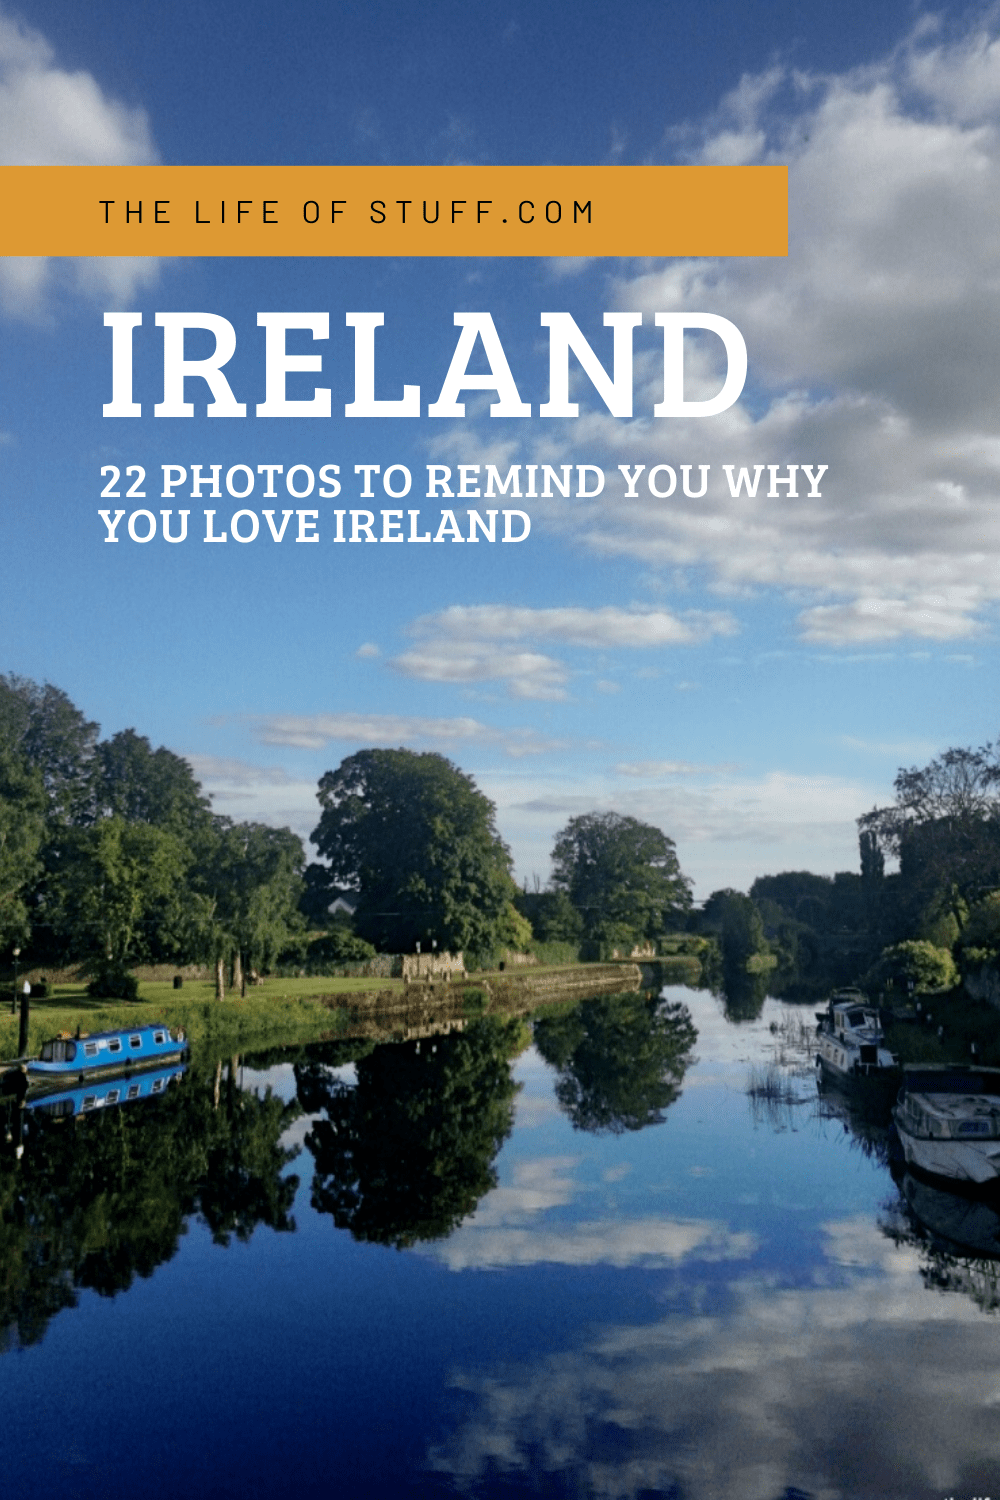 22 Photos to Remind You Why You Love Ireland - The Life of Stuff